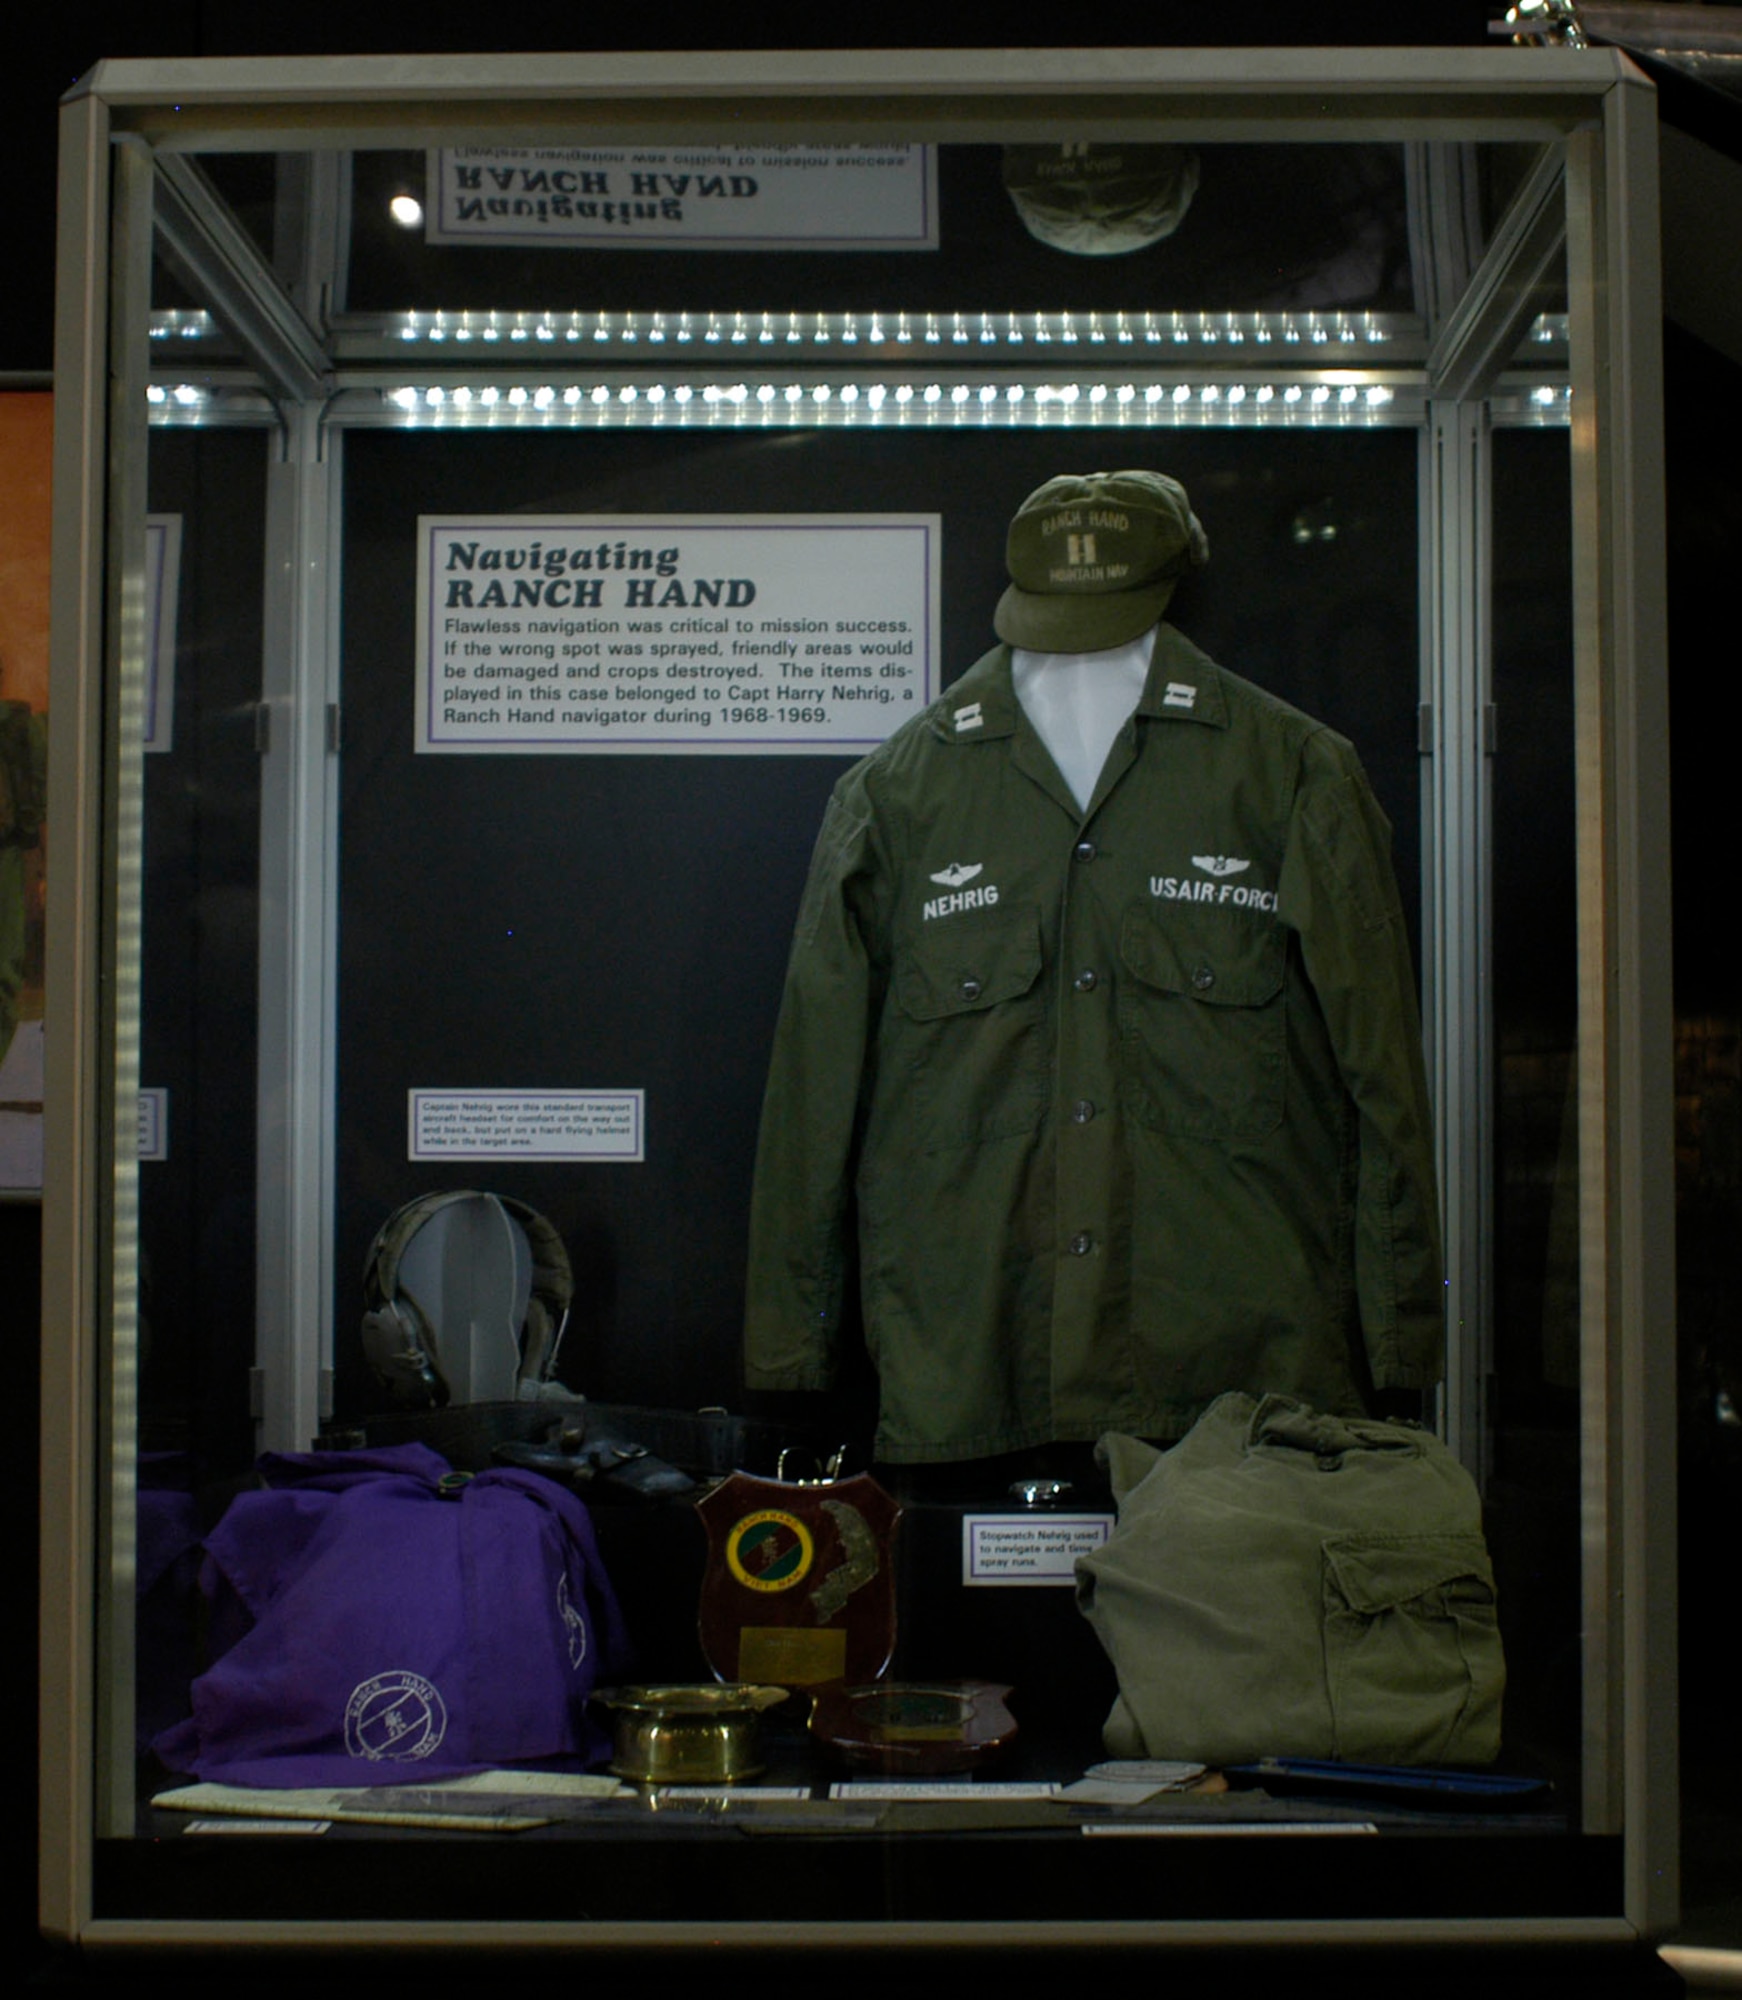 DAYTON, Ohio - Items in the Navigating Ranch Hand case, including an aircraft headset, stopwatch, map, ashtray, plaque and navigation instruments, on display in the Down in the Weeds: Ranch Hand exhibit in the Southeast Asia War Gallery at the National Museum of the U.S. Air Force. (U.S. Air Force photo)